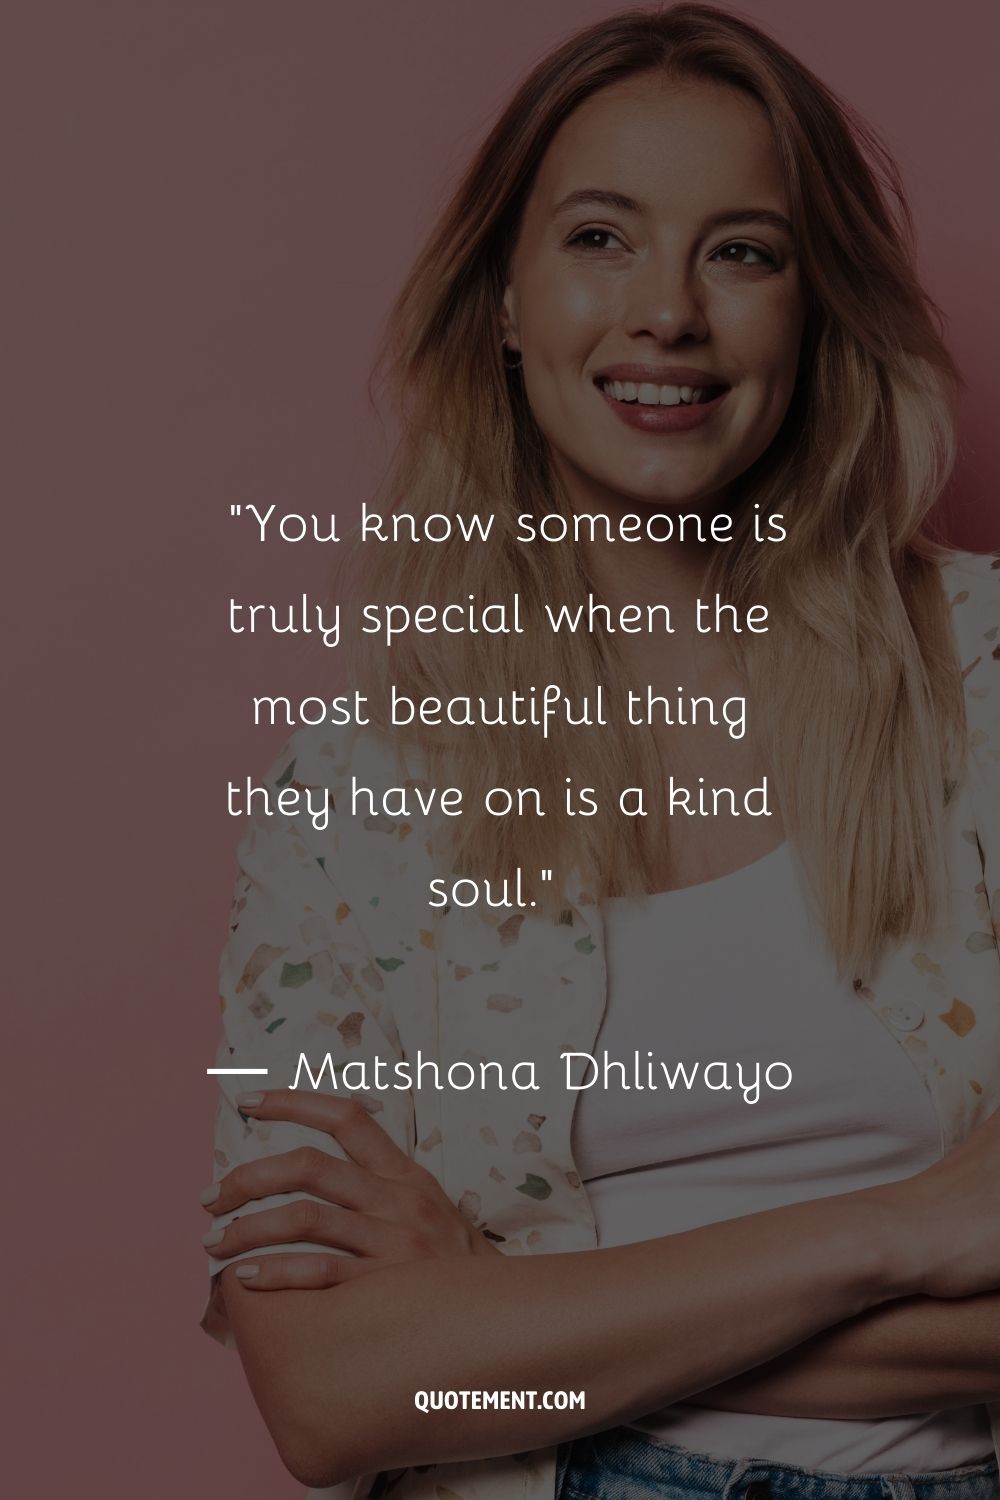 You know someone is truly special when the most beautiful thing they have on is a kind soul